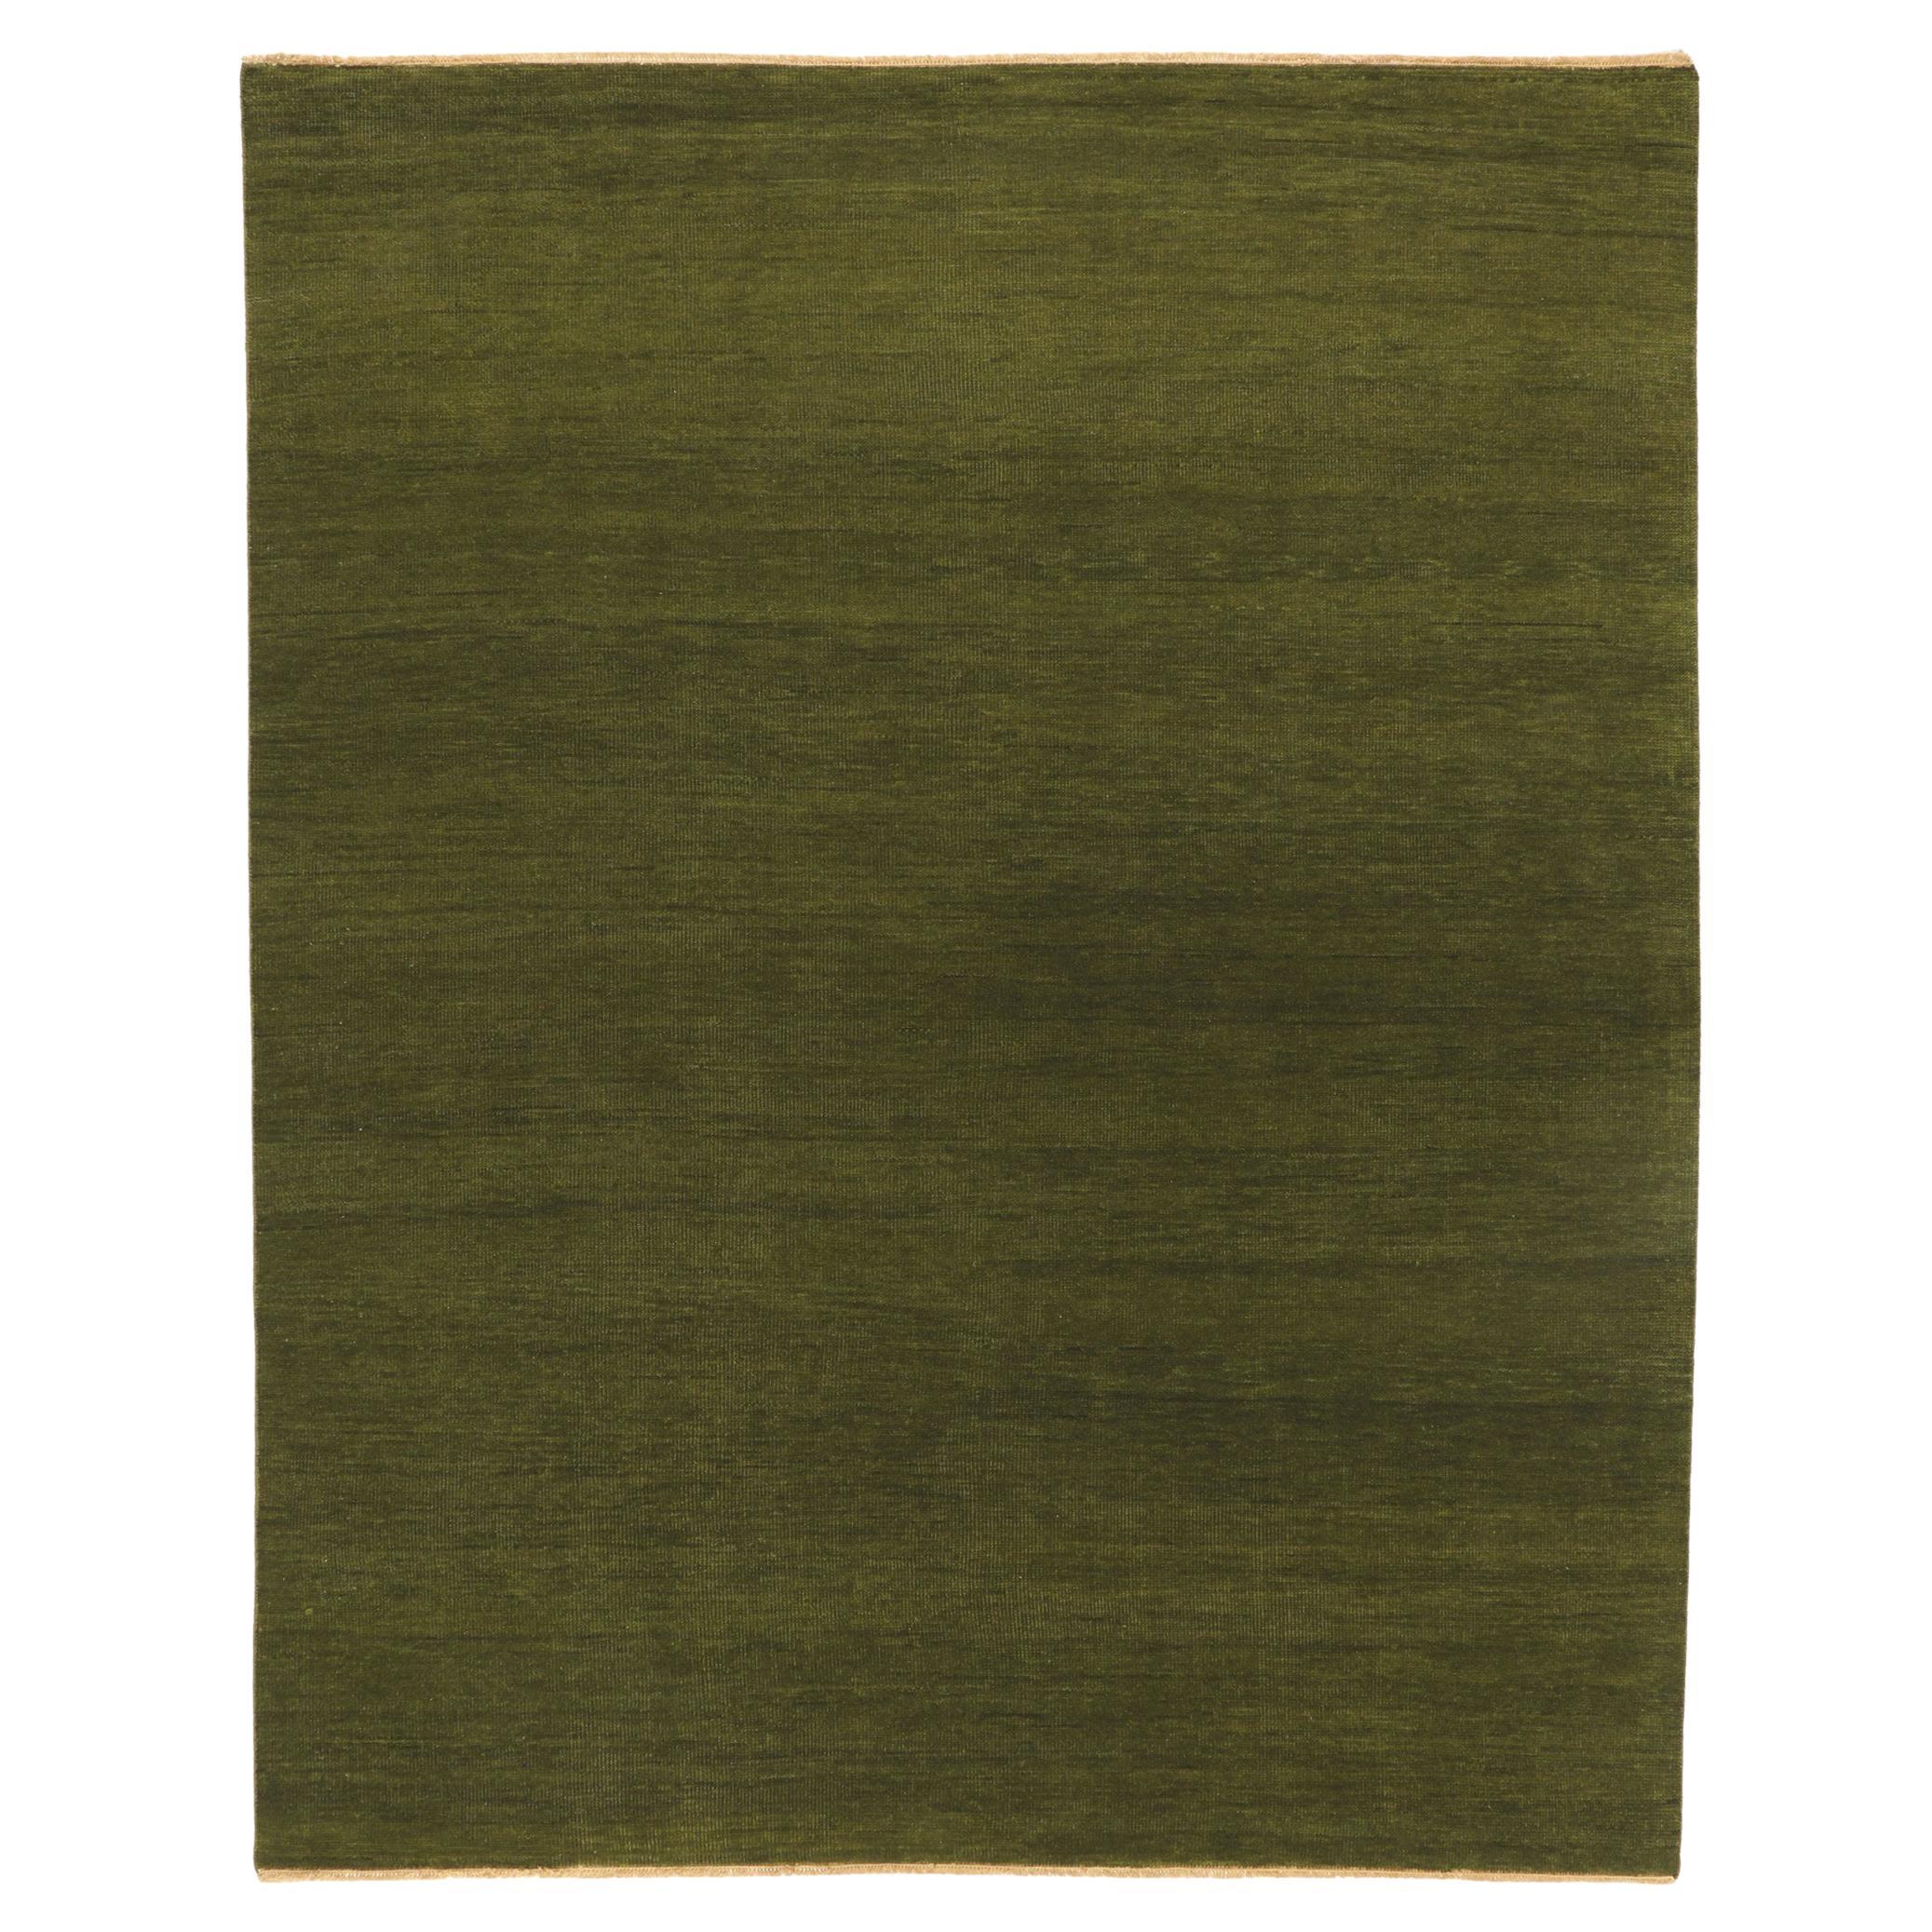 New Earthy Modern Area Rug with Biophilic Design For Sale